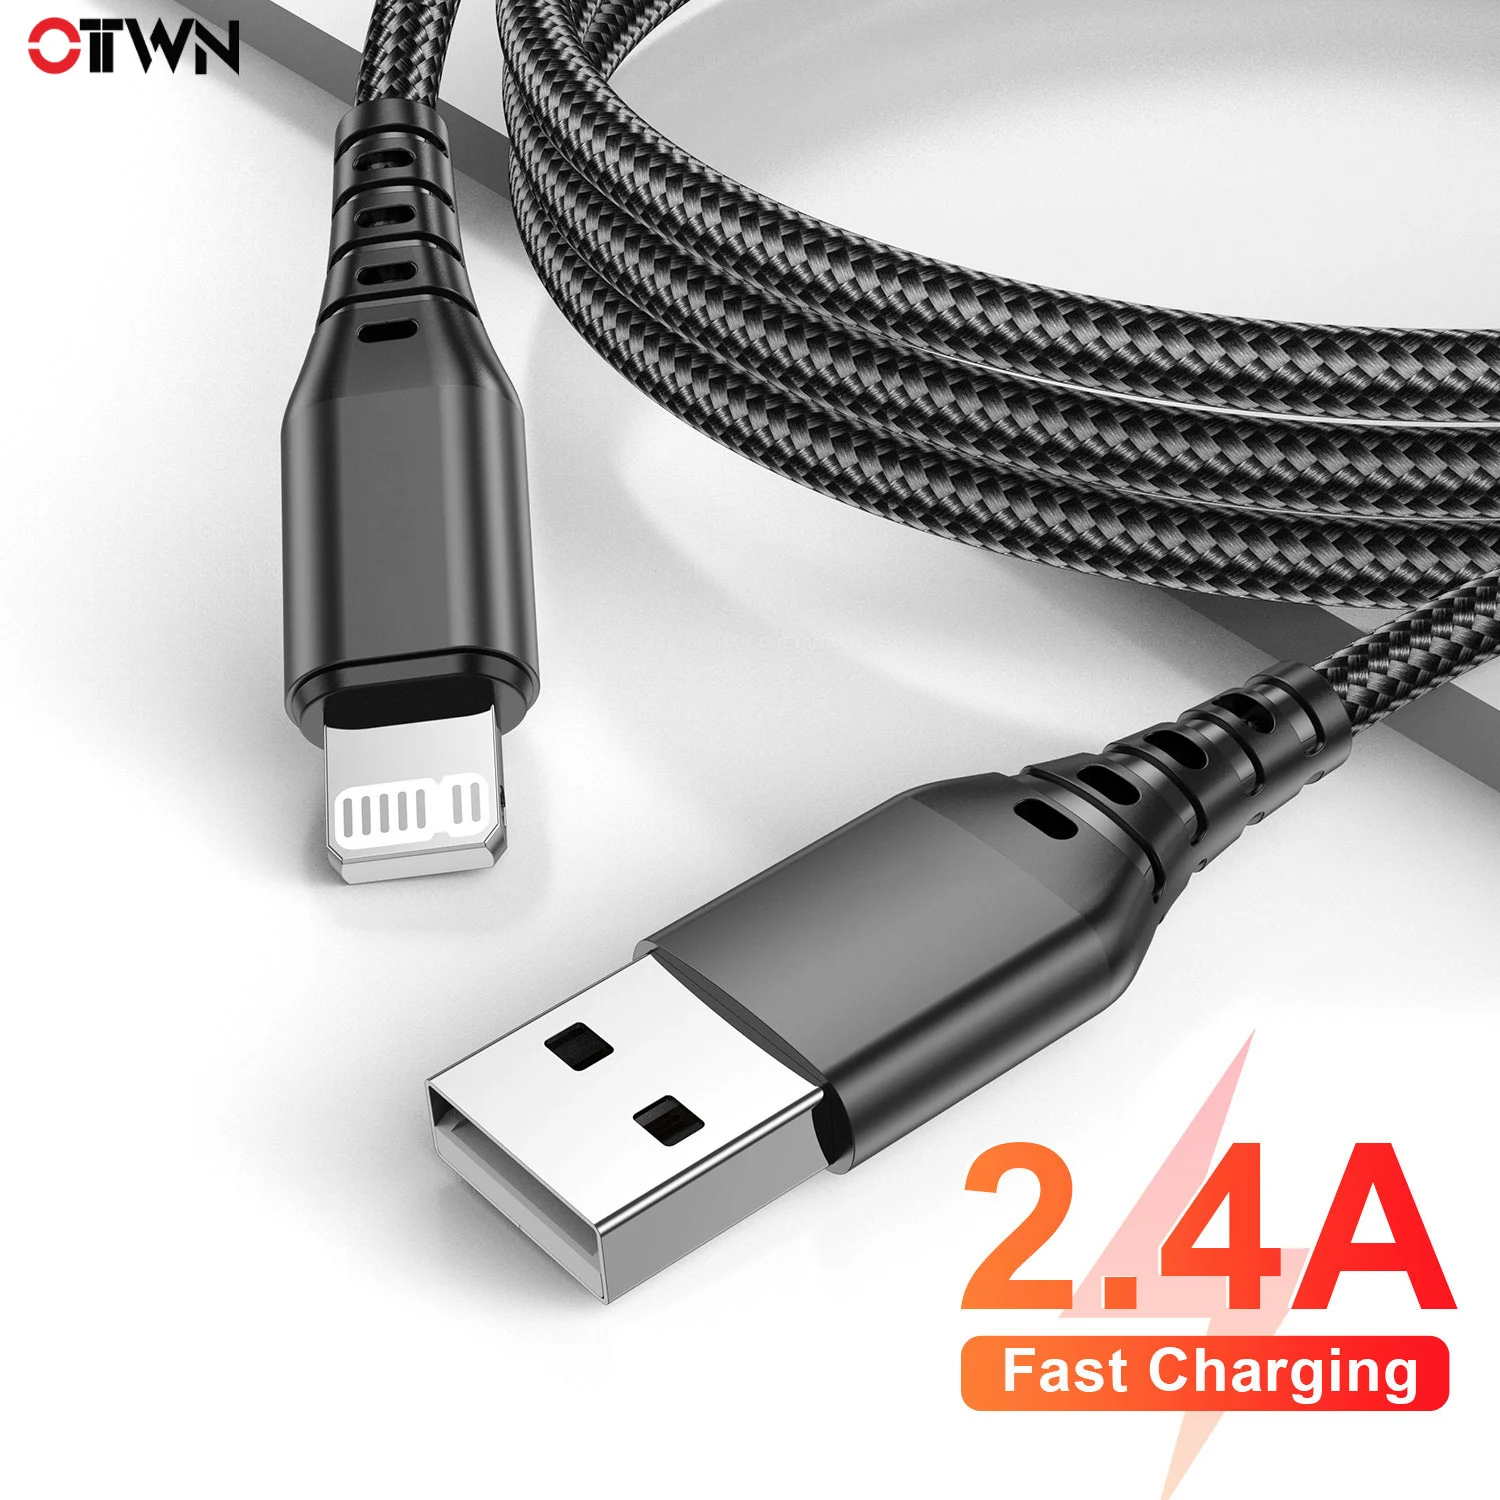 

OTTWN USB Cable for iPhone 14 13 12 Pro Max Mini 11 SE Xs X 8 Plus 7 6 2.4A Fast Charging Data Cord for Airpods iPad 0.25M 1M 2M